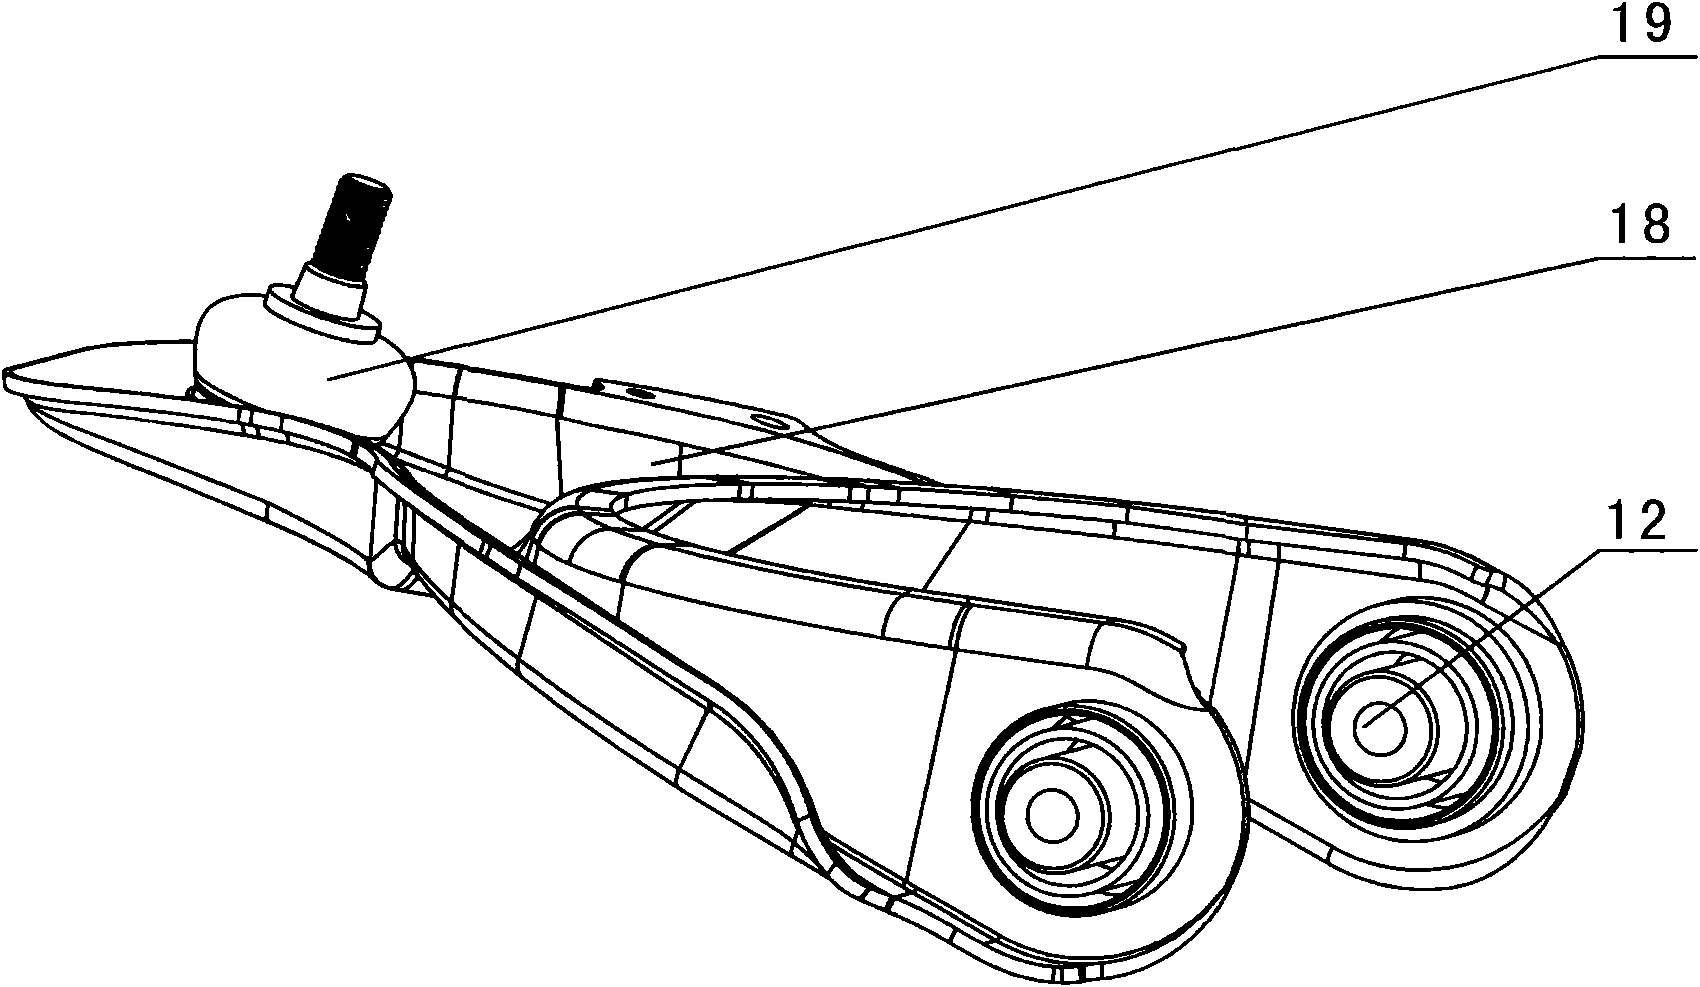 Retractable and adjustable U-shaped support arm structure for automobile chassis suspension wheel